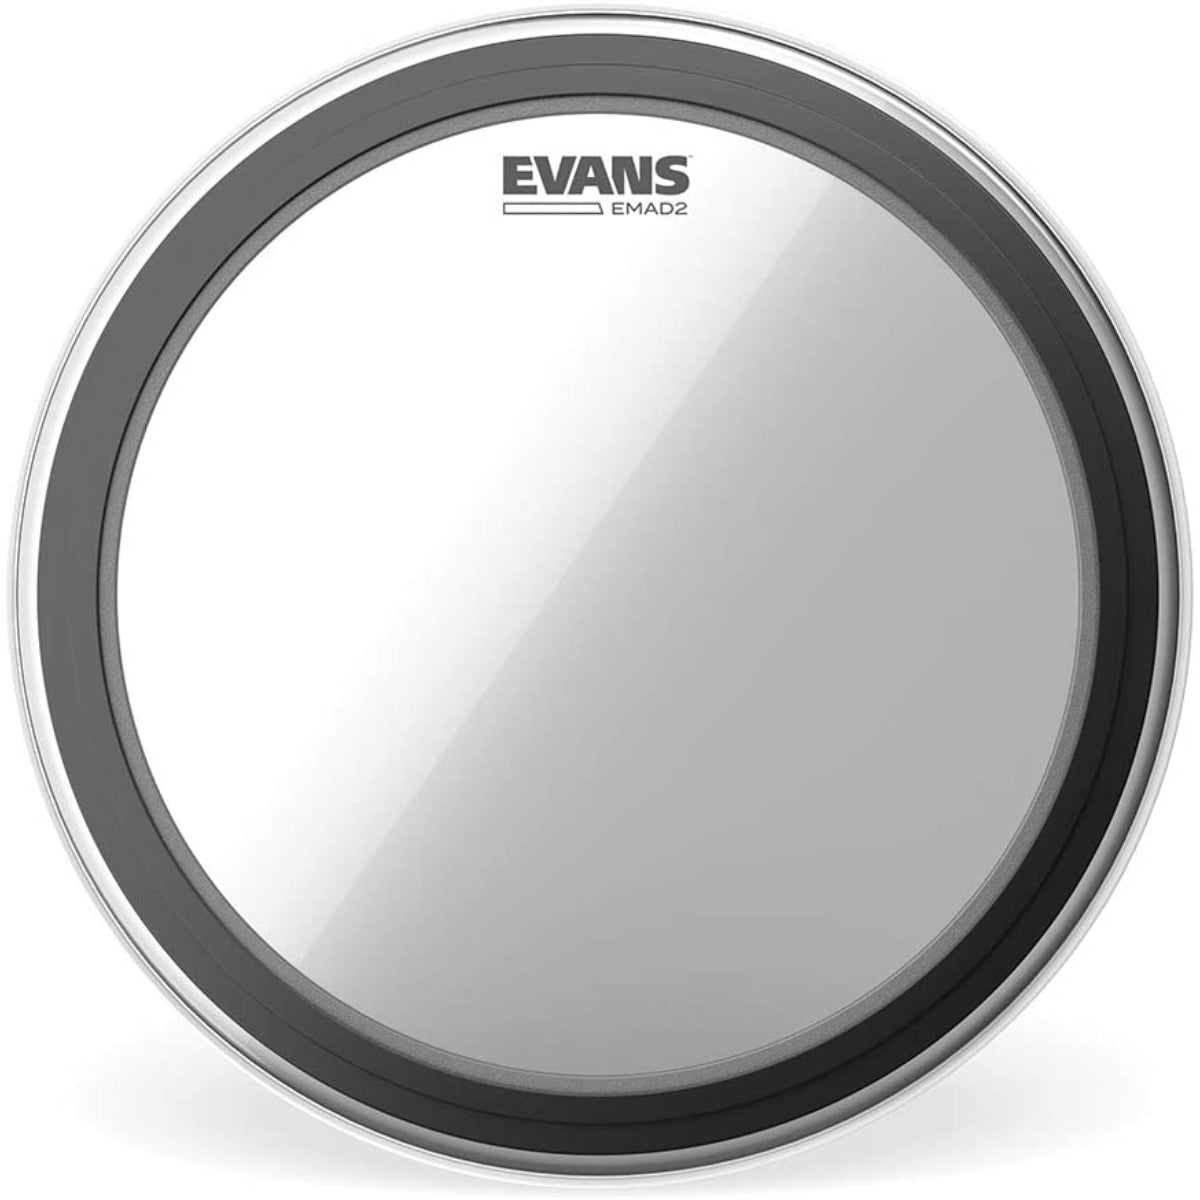 Evans BD20EMAD2 EMAD2 Clear 20" Drumhead